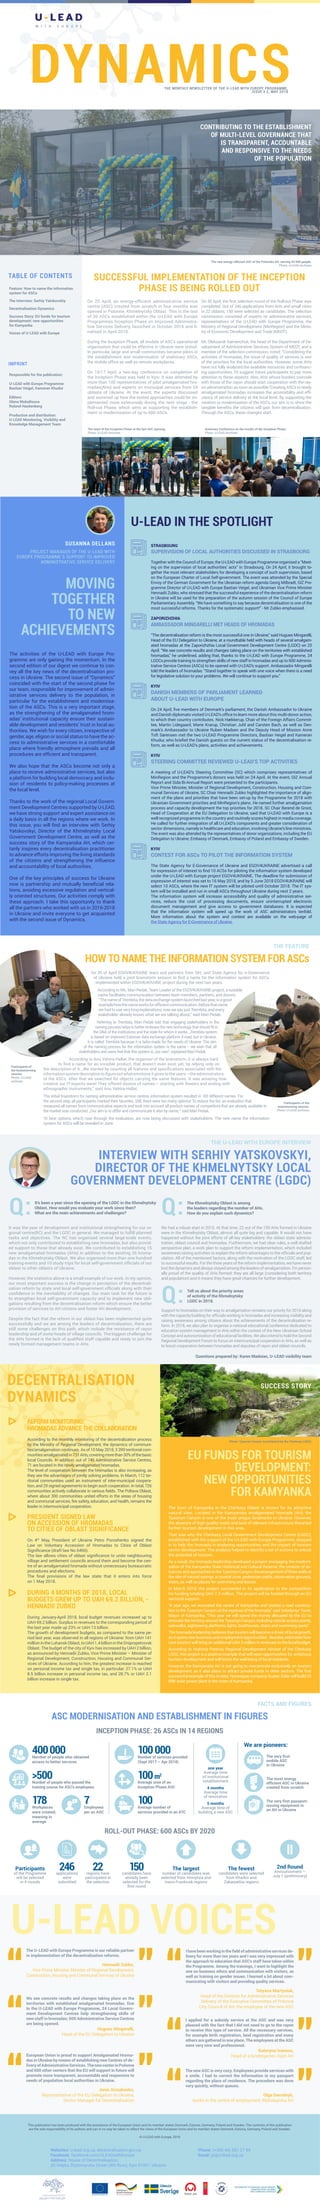 DYNAMICS
SUCCESSFUL IMPLEMENTATION OF THE INCEPTION
PHASE IS BEING ROLLED OUT
THE MONTHLY NEWSLETTER OF THE U-LEAD WITH EUROPE PROGRAMME,
ISSUE # 2, MAY 2018
The new energy-efficient ASC of the Polonska AH, serving 43 000 people.
Photo: U-LEAD Archives
TABLE OF CONTENTS
IMPRINT
Feature: How to name the information
system for ASCs
The Interview: Serhiy Yatskovskiy
Decentralisation Dynamics
Success Story: EU funds for tourism
development: new opportunities
for Kamyanka
Voices of U-LEAD with Europe
Responsible for the publication:
U-LEAD with Europe Programme
Bastian Veigel, Kameran Khudur
Editors:
Olena Molodtsova
Roland Hackenberg
Production and distribution:
U-LEAD Monitoring, Visibility and
Knowledge Management Team
On 30 April, the first selection round of the Roll-out Phase was
completed. Out of 246 applications from AHs and small cities
in 22 oblasts, 150 were selected as candidates. The selection
commission consisted of experts on administrative services,
representatives of the U-LEAD with Europe Programme, the
Ministry of Regional Development (MinRegion) and the Minis-
try of Economic Development and Trade (MEDT).
Mr. Oleksandr Kamenchuk, the head of the Department of De-
velopment of Administrative Services System of MEDT, and a
member of the selection commission, noted: “Considering the
activities of hromadas, the issue of quality of services is one
of the priorities for the local authorities. However, some AHs
have not fully analysed the available resources and co-financ-
ing opportunities. I’d suggest future participants to pay more
attention to these aspects. Also, AHs whose borders coincide
with those of the rayon should start cooperation with the ray-
on administration as soon as possible.”Creating ASCs in newly
amalgamated hromadas increases the accessibility and effi-
ciency of service delivery at the local level. By supporting the
creation or modernisation of the ASCs, our aim is to show the
tangible benefits the citizens will gain from decentralisation.
Through the ASCs, these changes start.
On 25 April, an energy-efficient administrative service
centre (ASC) created from scratch in four months was
opened in Polonne, Khmelnytsky Oblast. This is the last
of 26 ASCs established within the U-LEAD with Europe
Programmes Inception Phase on Improved Administra-
tive Services Delivery, launched in October 2016 and fi-
nalised in April 2018.
During the Inception Phase, all models of ASC’s operational
organisation that could be effective in Ukraine were tested.
In particular, large and small communities became pilots in
the establishment and modernisation of stationary ASCs,
the mobile office as well as remote workplaces.
On 16-17 April, a two-day conference on completion of
the Inception Phase was held in Kyiv. It was attended by
more than 100 representatives of pilot amalgamated hro-
madas(AHs) and experts on municipal services from 24
oblasts of Ukraine. At the event, the experts discussed
and summed up how the tested approaches could be im-
plemented more extensively during the next stage - the
Roll-out Phase, which aims at supporting the establish-
ment or modernisation of up to 600 ASCs.
CONTRIBUTING TO THE ESTABLISHMENT
OF MULTI-LEVEL GOVERNANCE THAT
IS TRANSPARENT, ACCOUNTABLE
AND RESPONSIVE TO THE NEEDS
OF THE POPULATION
SUCCESS STORY
EU FUNDS FOR TOURISM
DEVELOPMENT:
NEW OPPORTUNITIES
FOR KAMYANKA
DECENTRALISATION
DYNAMICS
The town of Kamyanka in the Cherkasy Oblast is known for its attractive
natural sites. Located in the Kamyanska amalgamated hromada (AH), the
Tyasmyn Canyon is one of the most unique landmarks in Ukraine. However,
the absence of high quality roads and lack of relevant infrastructure thwarted
further tourism development in this area.
That was why the Cherkasy Local Government Development Centre (LGDC),
established with the support of the U-LEAD with Europe Programme, stepped
in to help the hromada in analysing opportunities and the impact of tourism
sector development. The analysis helped to identify a set of actions to unlock
the potential of tourism.
As a result, the hromada leadership developed a project envisaging the moderni-
sation of the Kamyanka State Historical and Cultural Reserve, the creation of en-
trancesandapproachestotheTyasmynCanyon,thearrangementofthreewellsat
the site of natural springs, a coastal zone, pedestrian paths, observation grounds,
stairs, as well as places for swimming and leisure.
In March 2018, the project succeeded in its application to the competition
for funding totaling UAH 7.3 million. The project will be funded through an EU
sectoral support.
“A year ago, we renovated the centre of Kamyanka and started a road construc-
tion to the Tyasmyn Canyon at the expense of the hromada,” said Volodymyr Toron,
Mayor of Kamyanka. “This year we will spend the money allocated by the EU to
renovate the territory around the Tyasmyn Canyon, including vehicle access points,
sidewalks, sightseeing platforms, lights, boathouses, stairs and swimming spots”.
Thehromadaleadershipbelievesthattourismwillbecomeadriveroflocalgrowth,
asitopensnewbusinessandemploymentopportunities. Besides,estimatesfore-
cast tourism will bring an additional UAH 3 million in revenues to the local budget.
According to Hryhoriy Pererva, Regional Development Adviser of the Cherkasy
LGDC, this project is a positive example that will open opportunities for ambitious
tourism development and will boost the well-being of local residents.
However, the Kamyanska AH is not going to concentrate exclusively on tourism
development, as it also plans to attract private funds in other sectors. The first
successfulexampleofthistodate:NorwegiancompanyScatecSolarwillbuild25
MW solar power plant in the town of Kamyanka.
REFORM MONITORING:
HROMADAS ADVANCE THE COLLABORATION
According to the monthly monitoring of the decentralization process
by the Ministry of Regional Development, the dynamics of communi-
ties’amalgamation continues. As of 10 May 2018, 3 399 territorial com-
munitiesamalgamatedin731AHs,coveringmorethan30%ofthebasic
local Councils. In addition, out of 746 Administrative Service Centres,
71 are located in the newly amalgamated hromadas.
The level of cooperation between the hromadas is also increasing, as
they see the advantages of jointly solving problems. In March, 112 ter-
ritorial communities used an instrument of inter-municipal coopera-
tion, and 29 signed agreements to begin such cooperation. In total, 726
communities actively collaborate in various fields. The Poltava Oblast,
where about 300 communities united efforts in the areas of housing
and communal services, fire safety, education, and health, remains the
leader in intermunicipal cooperation.
PRESIDENT SIGNED LAW
ON ACCESSION OF HROMADAS
TO CITIES OF OBLAST SIGNIFICANCE
On 4th
May, President of Ukraine Petro Poroshenko signed the
Law on Voluntary Accession of Hromadas to Cities of Oblast
Significance (draft law No 6466).
The law allows cities of oblast significance to unite neighbouring
village and settlement councils around them and become the cen-
tre of an amalgamated hromada without unnecessary bureaucratic
procedures and elections.
The final provisions of the law state that it enters into force
on 1 May 2018.
DURING 4 MONTHS OF 2018, LOCAL
BUDGETS GREW UP TO UAH 69.2 BILLION, -
HENNADII ZUBKO
During January-April 2018, local budget revenues increased up to
UAH 69.2 billion. Surplus in revenues to the corresponding period of
the last year made up 23% or UAH 13 billion.
The growth of development budgets, as compared to the same pe-
riod last year, was observed in all regions of Ukraine: from UAH 141
millionintheLuhanskOblast,toUAH1.4billionintheDnipropetrovsk
Oblast. The budget of the city of Kyiv has increased by UAH 2 billion,
as announced by Hennadii Zubko, Vice Prime Minister – Minister of
Regional Development, Construction, Housing and Communal Ser-
vices of Ukraine. According to him, the greatest increase is reached
on personal income tax and single tax, in particular: 27.1% or UAH
8.5 billion increase in personal income tax, and 28.7% or UAH 2.1
billion increase in single tax.
INTERVIEW WITH SERHIY YATSKOVSKYI,
DIRECTOR OF THE KHMELNYTSKY LOCAL
GOVERNMENT DEVELOPMENT CENTRE (LGDC)
It was the year of development and institutional strengthening for our re-
gional centre(RC) and the LGDC in general. We managed to fulfill planned
tasks and objectives. The RC has organised several large-scale events,
which not only contributed to establishing new hromadas, but also provid-
ed support to those that already exist. We contributed to establishing 15
new amalgamated hromadas (AHs) in addition to the existing 26 hroma-
das in the Khmelnytsky Oblast. We also organised more than one hundred
training events and 10 study trips for local self-government officials of our
oblast to other oblasts of Ukraine.
However, the statistics above is a small example of our work. In my opinion,
our most important success is the change in perception of the decentrali-
sation reform by state and local self-government officials along with their
confidence in the inevitability of changes. Our main task for the future is
to strengthen local self-government capacity and to implement new obli-
gations resulting from the decentralisation reform which ensure the better
provision of services to AH citizens and foster AH development.
Despite the fact that the reform in our oblast has been implemented quite
successfully and we are among the leaders of decentralisation, there are
still some challenges on this path, which include the resistance of rayon
leadership and of some heads of village councils. The biggest challenge for
the AHs formed is the lack of qualified staff capable and ready to join the
newly formed management teams in AHs.
We had a robust start in 2015. At that time, 22 out of the 159 AHs formed in Ukraine
were in the Khmelnytsky Oblast, almost all quite big and capable. It would not have
happened without the joint efforts of all key stakeholders: the oblast state adminis-
tration, oblast council and hromadas. Furthermore, we had clear rules, a well drafted
perspective plan, a work plan to support the reform implementation, which included
awareness raising activities to explain the reform advantages to the officials and pop-
ulation. All of the mentioned factors, along with the motivation of the LGDC staff, led
to successful results. For the three years of the reform implementation, we have never
lostthedynamicsandalwaysstayedamongtheleadersofamalgamation.I’mperson-
ally proud of the quality of AHs formed: they are all large (considering both territory
and population) and it means they have great chances for further development.
Questions prepared by: Karen Madoian, U-LEAD visibility team
It’s been a year since the opening of the LGDC in the Khmelnytsky
Oblast. How would you evaluate your work since then?
What are the main achievements and challenges?Q: The Khmelnytsky Oblast is among
the leaders regarding the number of AHs.
How do you explain such dynamics?Q:
Support to hromadas on their way to amalgamation remains our priority for 2018 along
with the capacity building for officials working in hromadas and increasing visibility and
raising awareness among citizens about the achievements of the decentralisation re-
form. In 2018, we also plan to organise a national educational conference dedicated to
education system management in AHs within the context of the New Ukrainian School
Conceptandautonomisationofeducationalfacilities.WealsointendtoholdtheSecond
Regional Development Forum to focus on intermunicipal cooperation in AHs, as well as
to boost cooperation between hromadas and deputies of rayon and oblast councils.
Tell us about the priority areas
of activity of the Khmelnytsky
LGDC in 2018.Q:
This publication has been produced with the assistance of the European Union and its member states Denmark, Estonia, Germany, Poland and Sweden. The contents of this publication
are the sole responsibility of its authors and can in no way be taken to reflect the views of the European Union and its member states Denmark, Estonia, Germany, Poland and Sweden.
© U-LEAD with Europe, 2018
THE U-LEAD WITH EUROPE INTERVIEW
U-LEAD VOICES
Websites: u-lead.org.ua, decentralisation.gov.ua
Facebook: facebook.com/ULEADwithEurope
Address: House of Decentralisation,
20 Velyka Zhytomyrska Street (4th floor), Kyiv 01001, Ukraine
Phone: (+380 44) 581 27 99
Email: pr@u-lead.org.ua
We see concrete results and changes taking place on the
territories with established amalgamated hromadas. Due
to the U-LEAD with Europe Programme, 24 Local Govern-
ment Development Centres help strengthening skills of
new staff in hromadas; 600 Administrative Service Centres
are being opened.
Hugues Mingarelli,
Head of the EU Delegation to Ukraine
I applied for a subsidy service at the ASC and was very
pleased with the fact that I did not need to go to the rayon
to receive this type of service. All the necessary services,
for example birth registration, land registration and many
others are gathered in one place. The employees at the ASC
were very nice and professional.
Kateryna Ivanova,
Head of a kindergarten, Kipti AH
The new ASC is very cozy. Employees provide services with
a smile. I had to correct the information in my passport
regarding the place of residence. The procedure was done
very quickly, without queues.
Olga Dorodnyh,
works in the centre of employment, Mykolayivka AH
I have been working in the field of administrative services de-
livery for more than ten years and I was very impressed with
the approach to education that ASC’s staff have taken within
the Programme. Among the trainings, I want to highlight the
one on business ethics and communication with visitors, as
well as training on gender issues. I learned a lot about com-
municating with visitors and providing quality services.
Tetyana Martyniuk,
Head of the Division for Administrative Services
Delivery of the Executive Committee of Polonne
City Council of AH, the employee of the new ASC
The U-LEAD with Europe Programme is our reliable partner
in implementation of the decentralisation reforms.
Hennadii Zubko,
Vice Prime Minister, Minister of Regional Development,
Construction, Housing and Communal Services of Ukraine
European Union is proud to support Amalgamated Hroma-
das in Ukraine by means of establishing new Centres of de-
liveryofAdministrativeServices.ThenewcenterinPolonne
and 600 other centers that the EU will support in future will
promote more transparent, accountable and responsive to
needs of population local authorities in Ukraine.
Janis Aizsalnieks,
Representative of the EU Delegation to Ukraine,
Sector Manager for Decentralisation
The team of the Inception Phase at the last ASC opening.
Photo: U-LEAD Archives
Summary Conference on the results of the Inception Phase.
Photo: U-LEAD Archives
Photo: Tyasmin Canyon (contributed by the Cherkasy LGDC)
FACTS AND FIGURES
ASC MODERNISATION AND ESTABLISHMENT IN FIGURES
INCEPTION PHASE: 26 ASCs IN 14 REGIONS
ROLL-OUT PHASE: 600 ASCs BY 2020
Participants
of the Programme
will be selected
in 4 rounds
The largest
number of candidates was
selected from Vinnytsia and
Ivano-Frankivsk regions
The fewest
candidates were selected
from Kharkiv and
Zakarpattia regions
2nd Round
Announcement –
July 1 (preliminary)
The very first
mobile ASC
in Ukraine
The most energy
efficient ASC in Ukraine
created from scratch
The very first passport-
issuing equipment in
an AH in Ukraine
We are pioneers:
100000Number of services provided
(Sept 2017 – Apr 2018)
100m2
Average area of an
Inception Phase ASC
100Average number of
services provided in an ATC
246applications
were
submitted
22regions have
patricipated in
the selection
400000Number of people who obtained
access to better services
178Workplaces
were created,
meaning in
average
7Employees
per an ASC
>500Number of people who passed the
training course for ASC’s employees
one year
Average time
of institutional
establishment
4 months
Average time
of renovation
5 months
Average time of
building a new ASC
150candidates have
already been
selected for the
first round
HOW TO NAME THE INFORMATION SYSTEM FOR ASCs
On 26 of April EGOV4UKRAINE team and partners from SKL and State Agency for e-Governance
of Ukraine held a joint brainstorm session to find a name for the information system for ASCs,
implemented within EGOV4UKRAINE project during the next two years.
According to Ms. Mari Pedak, Team Leader of the EGOV4UKRAINE project, a suitable
name facilitates communication between team members, partners, and donors.
“ThenameofTrembita,thedataexchangesystemlaunchedlastyear,isagood
examplehowthenameworksforefficientcommunication.Beforethatname
we had to use very long explanations, now we say just Trembita, and every
stakeholder already knows what we are talking about,” said Mari Pedak.
Referring to Trembita, Mari Pedak told that engaging stakeholders in the
namingprocesshelpstobetterembracethenewtechnologythatshouldfitin
the DNA of the institutions and the state for whom it works. „Trembita system
is based on improved Estonian data exchange platform X-road, but in Ukraine,
it is called Trembita because it is tailor-made for the needs of Ukraine. The aim
of the naming process for the information system is the same – we wish that all
stakeholders and users feel that this system is „our own“, explained Mari Pedak.
According to Anu Vahtra-Hellat, the organizer of the brainstorm, it is always hard
to find a name for an invisible product, that doesn’t even exist yet, by relying only on
the description of it. „We started by counting all features and specifications associated with the
informationsystemdescriptiontofigureoutwhatemotionsitgivestotheusers–theadministrators
of the ASCs. After that we searched for objects carrying the same features. It was amazing how
creative our IT-experts were! They offered dozens of names – starting with flowers and ending with
ethnographic instruments,“ said Anu Vahtra-Hellat.
The initial brainstorm for naming administrative service centres information system resulted in 100 different names. For
the second step, all participants marked their favorites. Still, there were too many options! To reduce the list, an evaluation that
measured all names from communicative aspects and took into account all product names of competitors that are already available in
the market was conducted. „Our aim is to differ and communicate it also by name, “ said Mari Pedak.
10 best options, which rose through the evaluation, are now being discussed with stakeholders. The new name the information
system for ASCs will be revealed in June.
Participants of
the brainstorming
session.
Photo: U-LEAD
archives
Participants of the
brainstorming session.
Photo: U-LEAD archives
THE FEATURE
PROJECT MANAGER OF THE U-LEAD WITH
EUROPE PROGRAMME’S SUPPORT TO IMPROVED
ADMINISTRATIVE SERVICE DELIVERY
SUSANNA DELLANS
MOVING
TOGETHER
TO NEW
ACHIEVEMENTS
U-LEAD IN THE SPOTLIGHT
The activities of the U-LEAD with Europe Pro-
gramme are only gaining the momentum. In the
second edition of our digest we continue to con-
vey all the key news of the decentralisation pro-
cess in Ukraine. The second issue of “Dynamics”
coincided with the start of the second phase for
our team, responsible for improvement of admin-
istrative services delivery to the population, in
particular for the establishment and modernisa-
tion of the ASCs. This is a very important stage,
as the strengthening of the amalgamated hrom-
adas’ institutional capacity ensure their sustain-
able development and residents’ trust in local au-
thorities. We wish for every citizen, irrespective of
gender, age, eligion or social status to have the ac-
cess to administrative services in a comfortable
place where friendly atmosphere prevails and all
procedures are efficient and transparent.
We also hope that the ASCs become not only a
place to receive administrative services, but also
a platform for building local democracy and inclu-
sion of residents to policy-making processes at
the local level.
Thanks to the work of the regional Local Govern-
ment Development Centres supported by U-LEAD,
we have strong support and expert assistance on
a daily basis in all the regions where we work. In
this issue, you will find an interview with Serhiy
Yatskovskyi, Director of the Khmelnytsky Local
Government Development Centre, as well as the
success story of the Kamyanska AH, which cer-
tanly inspires every decentralisation practitioner
to advance efforts improving the living standards
of the citizens and strengthening the influence
and accountability of local authorities.
One of the key principles of success for Ukraine
now is partnership and mutually beneficial rela-
tions, avoiding excessive regulation and vertical-
ly oriented structures. Our activities comply with
these approach. I take this opportunity to thank
all the partners who worked with us in 2016-2018
in Ukraine and invite everyone to get acquainted
with the second issue of Dynamics.
STRASBOURG
SUPERVISION OF LOCAL AUTHORITIES DISCUSSED IN STRASBOURG
Together with the Council of Europe, the U-LEAD with Europe Programme organised a “Meet-
ing on the supervision of local authorities’ acts” in Strasbourg. On 24 April, it brought to-
gether the most relevant stakeholders for developing a concept of such supervision, based
on the European Charter of Local Self-government. The event was attended by the Special
Envoy of the German Government for the Ukrainian reform agenda Georg Milbradt, GIZ Pro-
gramme Director of U-LEAD with Europe Bastian Veigel, and Ukrainian Vice Prime Minister
Hennadii Zubko, who stressed that the successful experience of the decentralisation reform
in Ukraine will be used for the preparation of the autumn session of the Council of Europe
Parliamentary Assembly. “We have something to say because decentralisation is one of the
most successful reforms. Thanks for the systematic support!” - Mr Zubko emphasised.
ZAPORIZHZHIA
AMBASSADOR MINGARELLI MET HEADS OF HROMADAS
“The decentralisation reform is the most successful one in Ukraine,” said Hugues Mingarelli,
Head of the EU Delegation to Ukraine, at a roundtable held with heads of several amalgam-
ated hromadas at the Zaporizhzhia Local Government Development Centre (LGDC) on 25
April. “We see concrete results and changes taking place on the territories with established
hromadas,” he underlined, adding that, thanks to the U-LEAD with Europe Programme, 24
LGDCs provide training to strengthen skills of new staff in hromadas and up to 600 Adminis-
trative Service Centres (ASCs) to be opened with U-LEAD’s support. Ambassador Mingarelli
told the leaders of hromadas: “Stand together to speak with one voice when there is a need
for legislative solution to your problems. We will continue to support you.”
KYIV
DANISH MEMBERS OF PARLIAMENT LEARNED
ABOUT U-LEAD WITH EUROPE
On 24 April, five members of Denmark’s parliament, the Danish Ambassador to Ukraine
and Danish diplomats visited U-LEAD’s office to learn more about this multi-donor action,
to which their country contributes. Nick Hækkerup, Chair of the Foreign Affairs Commit-
tee, Martin Lidegaard, Marie Krarup, Christian Juhl and Carsten Bach, as well as Den-
mark’s Ambassador to Ukraine Ruben Madsen and the Deputy Head of Mission Anne
Toft Sørensen met the two U-LEAD Programme Directors, Bastian Veigel and Kameran
Khudur, who briefed the Danish guests on the current status of the decentralisation re-
form, as well as U-LEAD’s plans, activities and achievements.
KYIV
STEERING COMMITTEE REVIEWED U-LEAD’S TOP ACTIVITIES
A meeting of U-LEAD’s Steering Committee (SC) which comprises representatives of
MinRegion and the Programme’s donors was held on 24 April. At the event, GIZ Annual
Report and Sida Bi-Annual Report were presented to the participants.
Vice Prime Minister, Minister of Regional Development, Construction, Housing and Com-
munal Services of Ukraine, SC Chair Hennadii Zubko highlighted the importance of align-
ment of the plans and priorities that have been set-up by the Programme for 2018 with
Ukrainian Government priorities and MinRegion’s plans. He named further amalgamation
process and capacity development the top priorities for 2018. SC Chair Berend de Groot,
Head of Cooperation at the EU Delegation to Ukraine, said that U-LEAD with Europe is a
well recognized programme in the country and routinely scores highest in media coverage.
He called for further integration of all U-LEAD’s components and greater consideration of
sector dimensions, namely in healthcare and education, involving Ukraine’s line ministries.
The event was also attended by the representatives of donor organizations, including the EU
Delegation to Ukraine, Embassy of Denmark, Embassy of Poland and Embassy of Sweden.
KYIV
CONTEST FOR ASCs TO PILOT THE INFORMATION SYSTEM
The State Agency for E-Governance of Ukraine and EGOV4UKRAINE advertised a call
for expres­sion of interest to find 10 ACSs for piloting the information system developed
under the U-LEAD with Europe project EGOV4UKRAINE. The deadline for submission of
expression of interest was set to 16 May 2018, and by 5 June 2018 EGOV4UKRAINE will
select 10 ASCs, where the new IT system will be piloted until October 2018. The IT sys-
tem will be installed and run in small ASCs throughout Ukraine during next 2 years.
The information system will increase accessibility and quality of administrative ser­
vices, reduce the cost of processing documents, ensure uninterrupted electronic
document management and give access to government databases. It is expected
that the information system will speed up the work of ASC administrators tenfold.
More information about the system and contest are available on the web-page of
the State Agency for E-Governance of Ukraine.
 